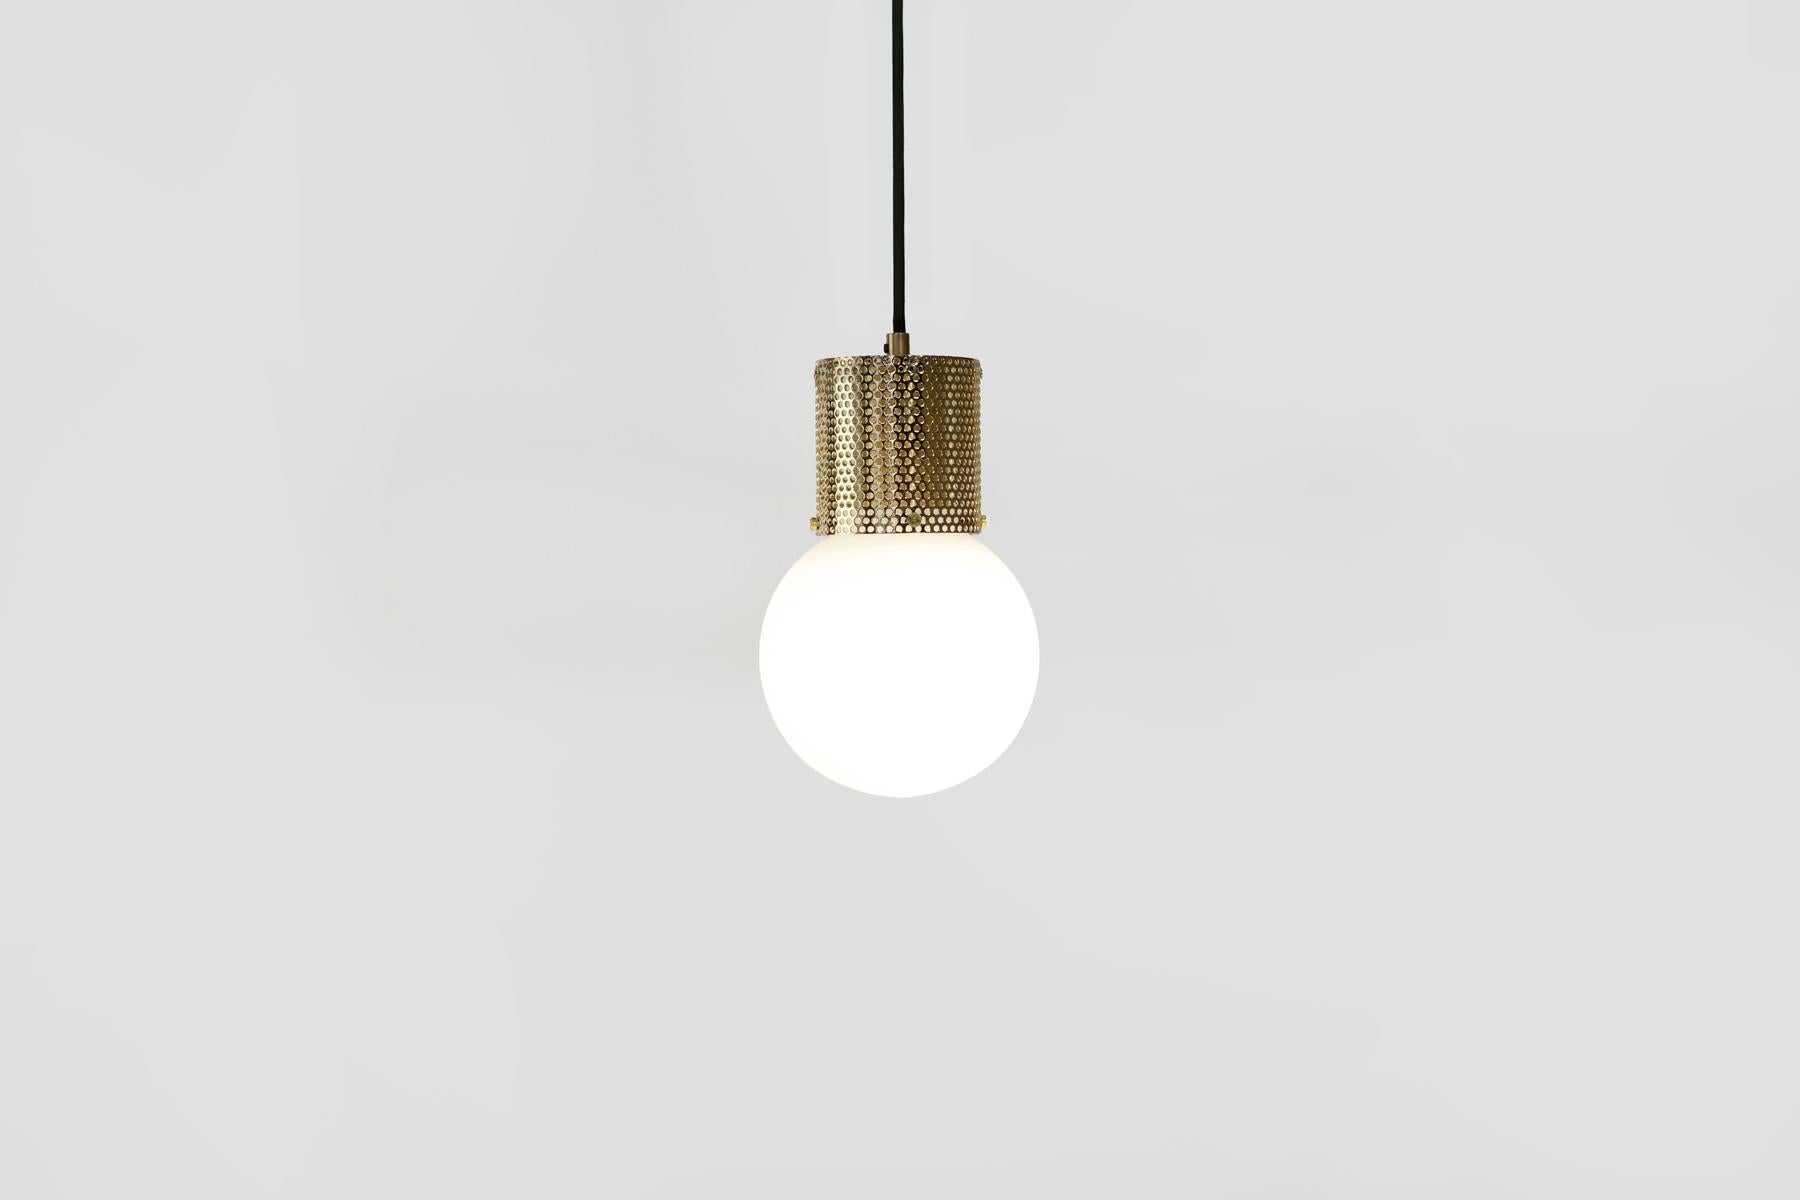 Paint Perf Pendant Light Small Off-White Perforated Tube, Glass Round Orb Shade For Sale